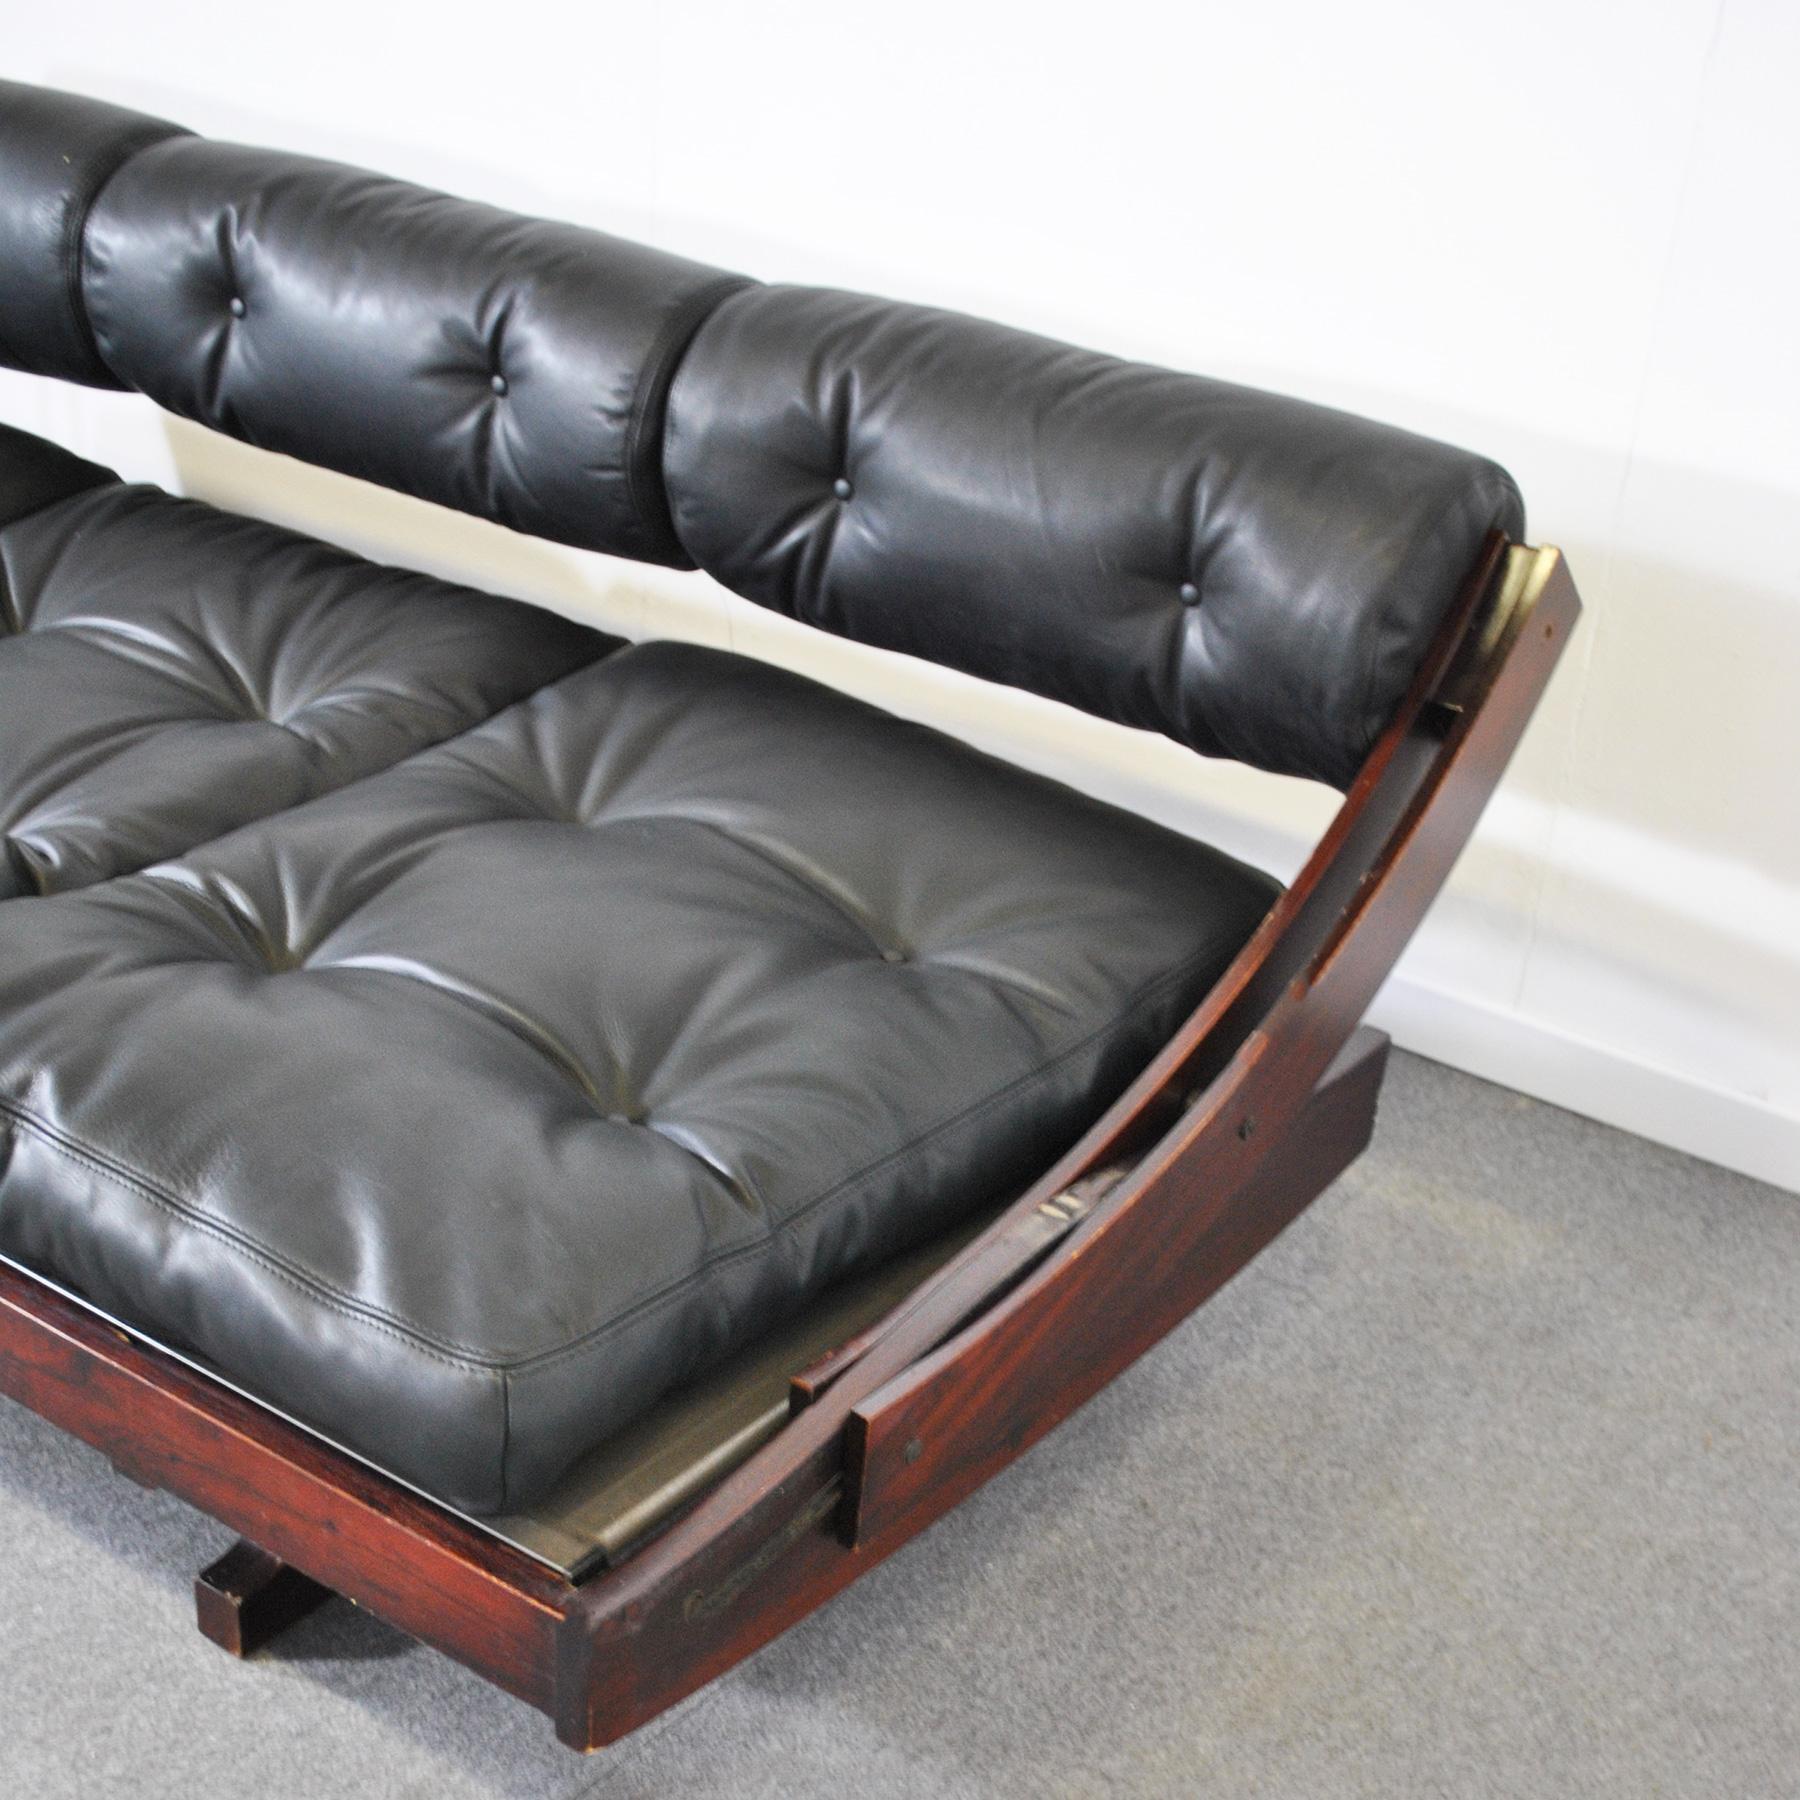 Mid-Century Modern Gianni Songia Sofa for Sormani Late 60's For Sale